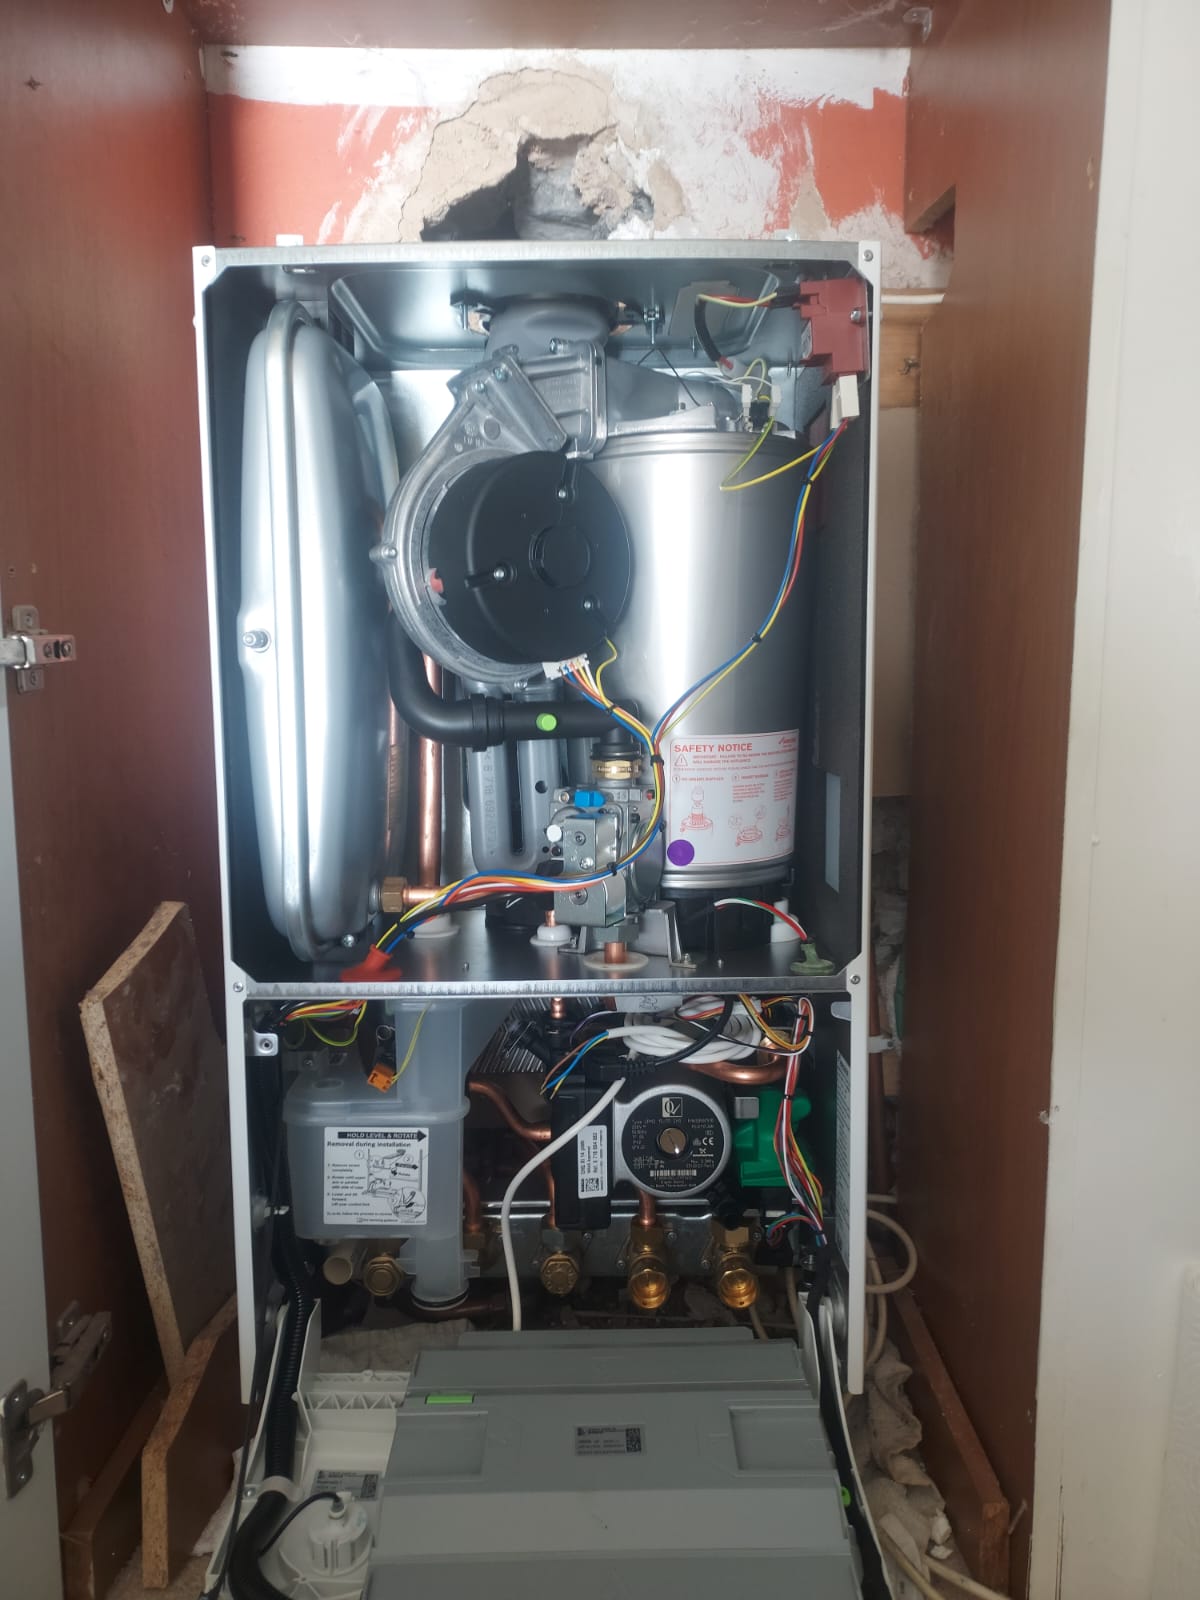 New Boiler in the Process of Install